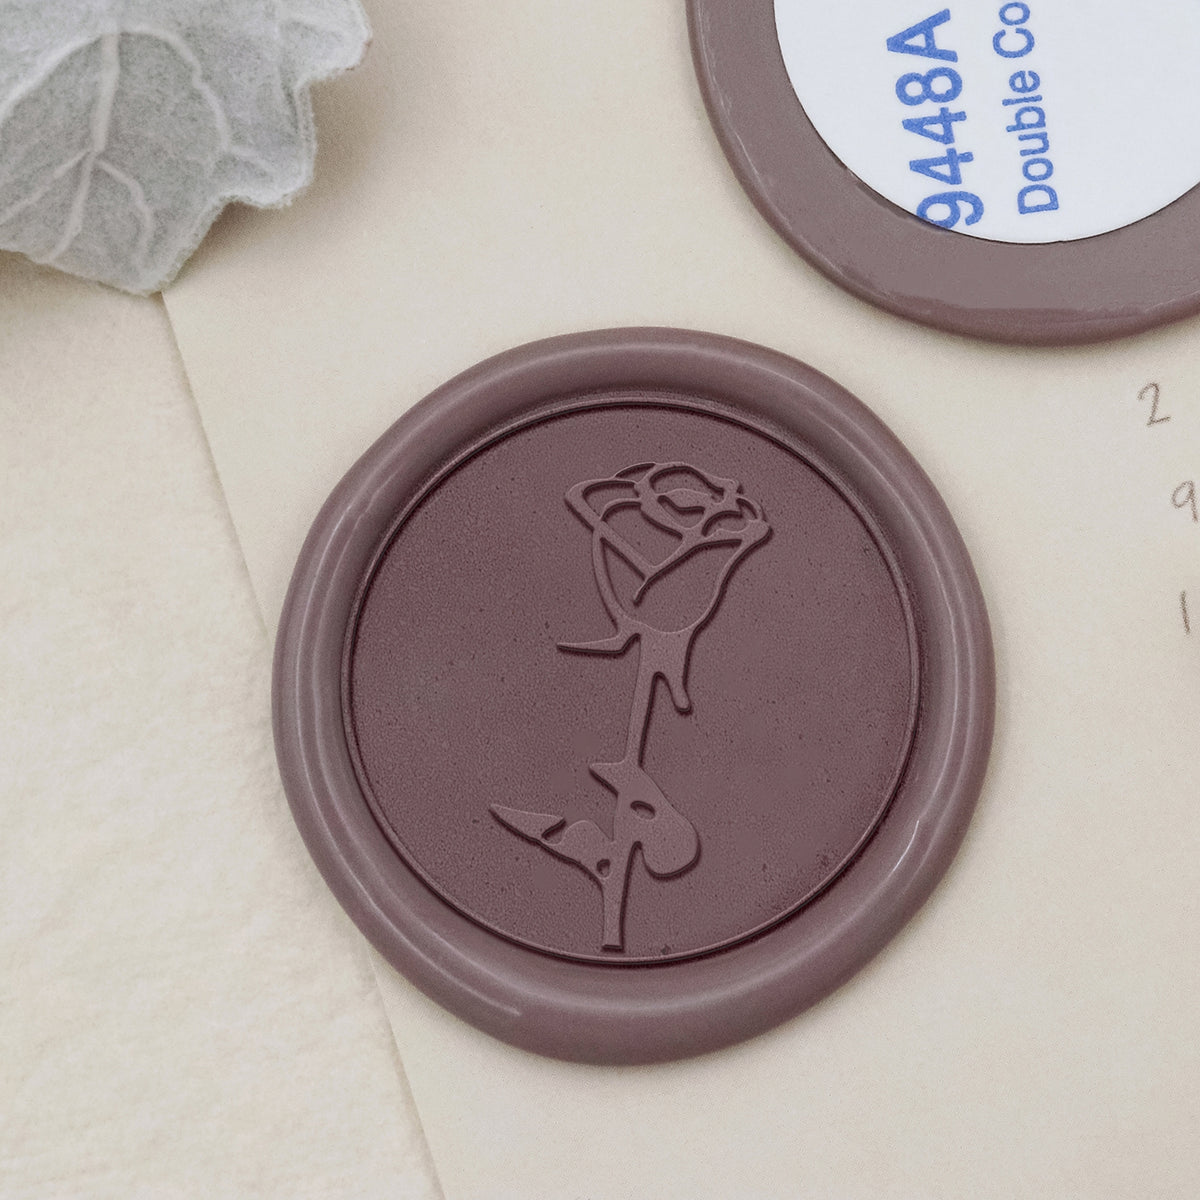 Stamprints Rose Self-adhesive Wax Seal Stickers - style 01